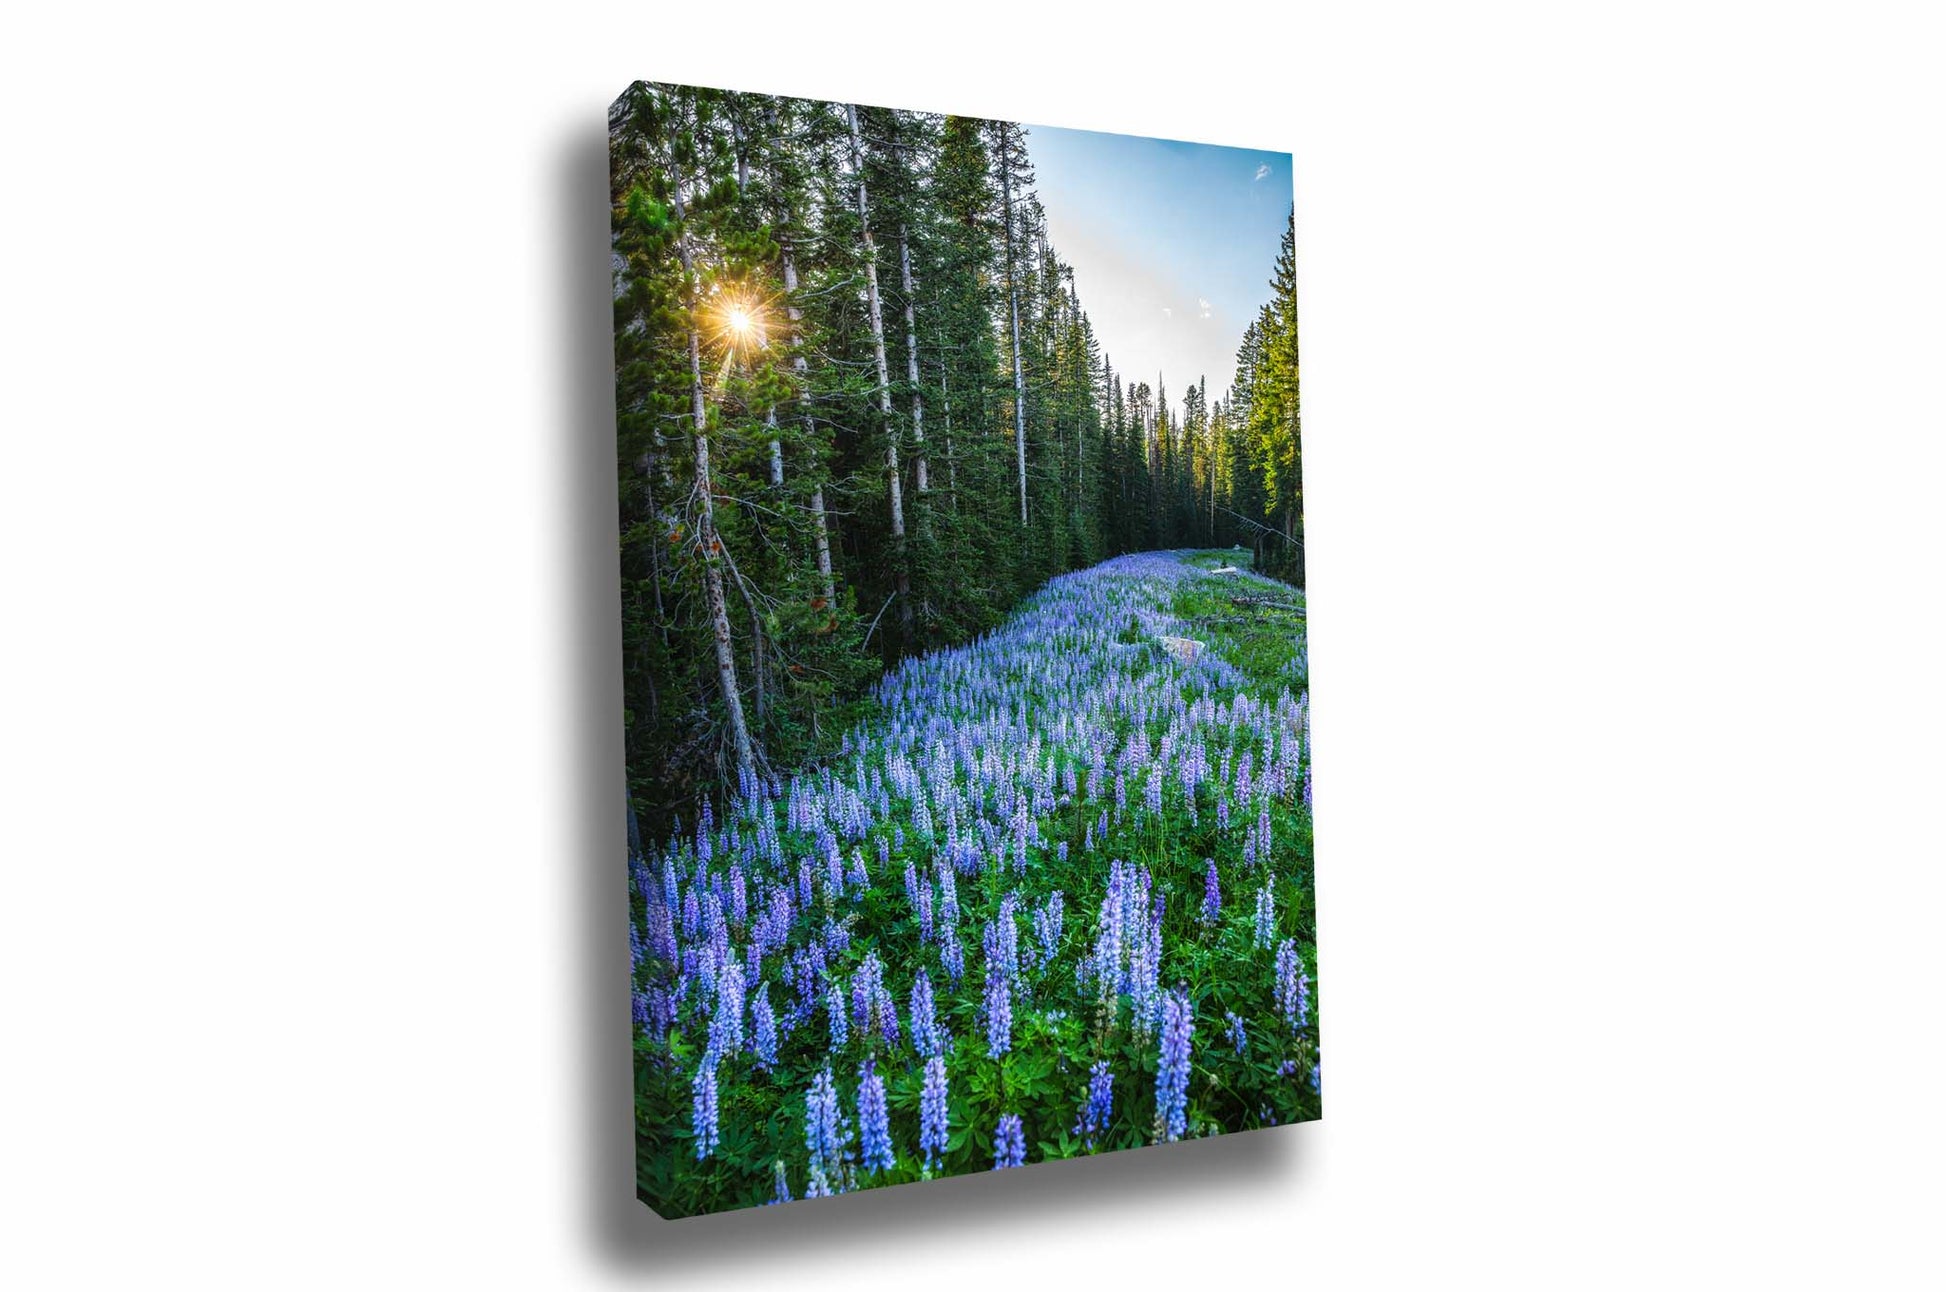 Rocky Mountain canvas wall art of purple lupine wildflowers covering the forest floor as the sun twinkles through pine trees on a summer day in Montana by Sean Ramsey of Southern Plains Photography.